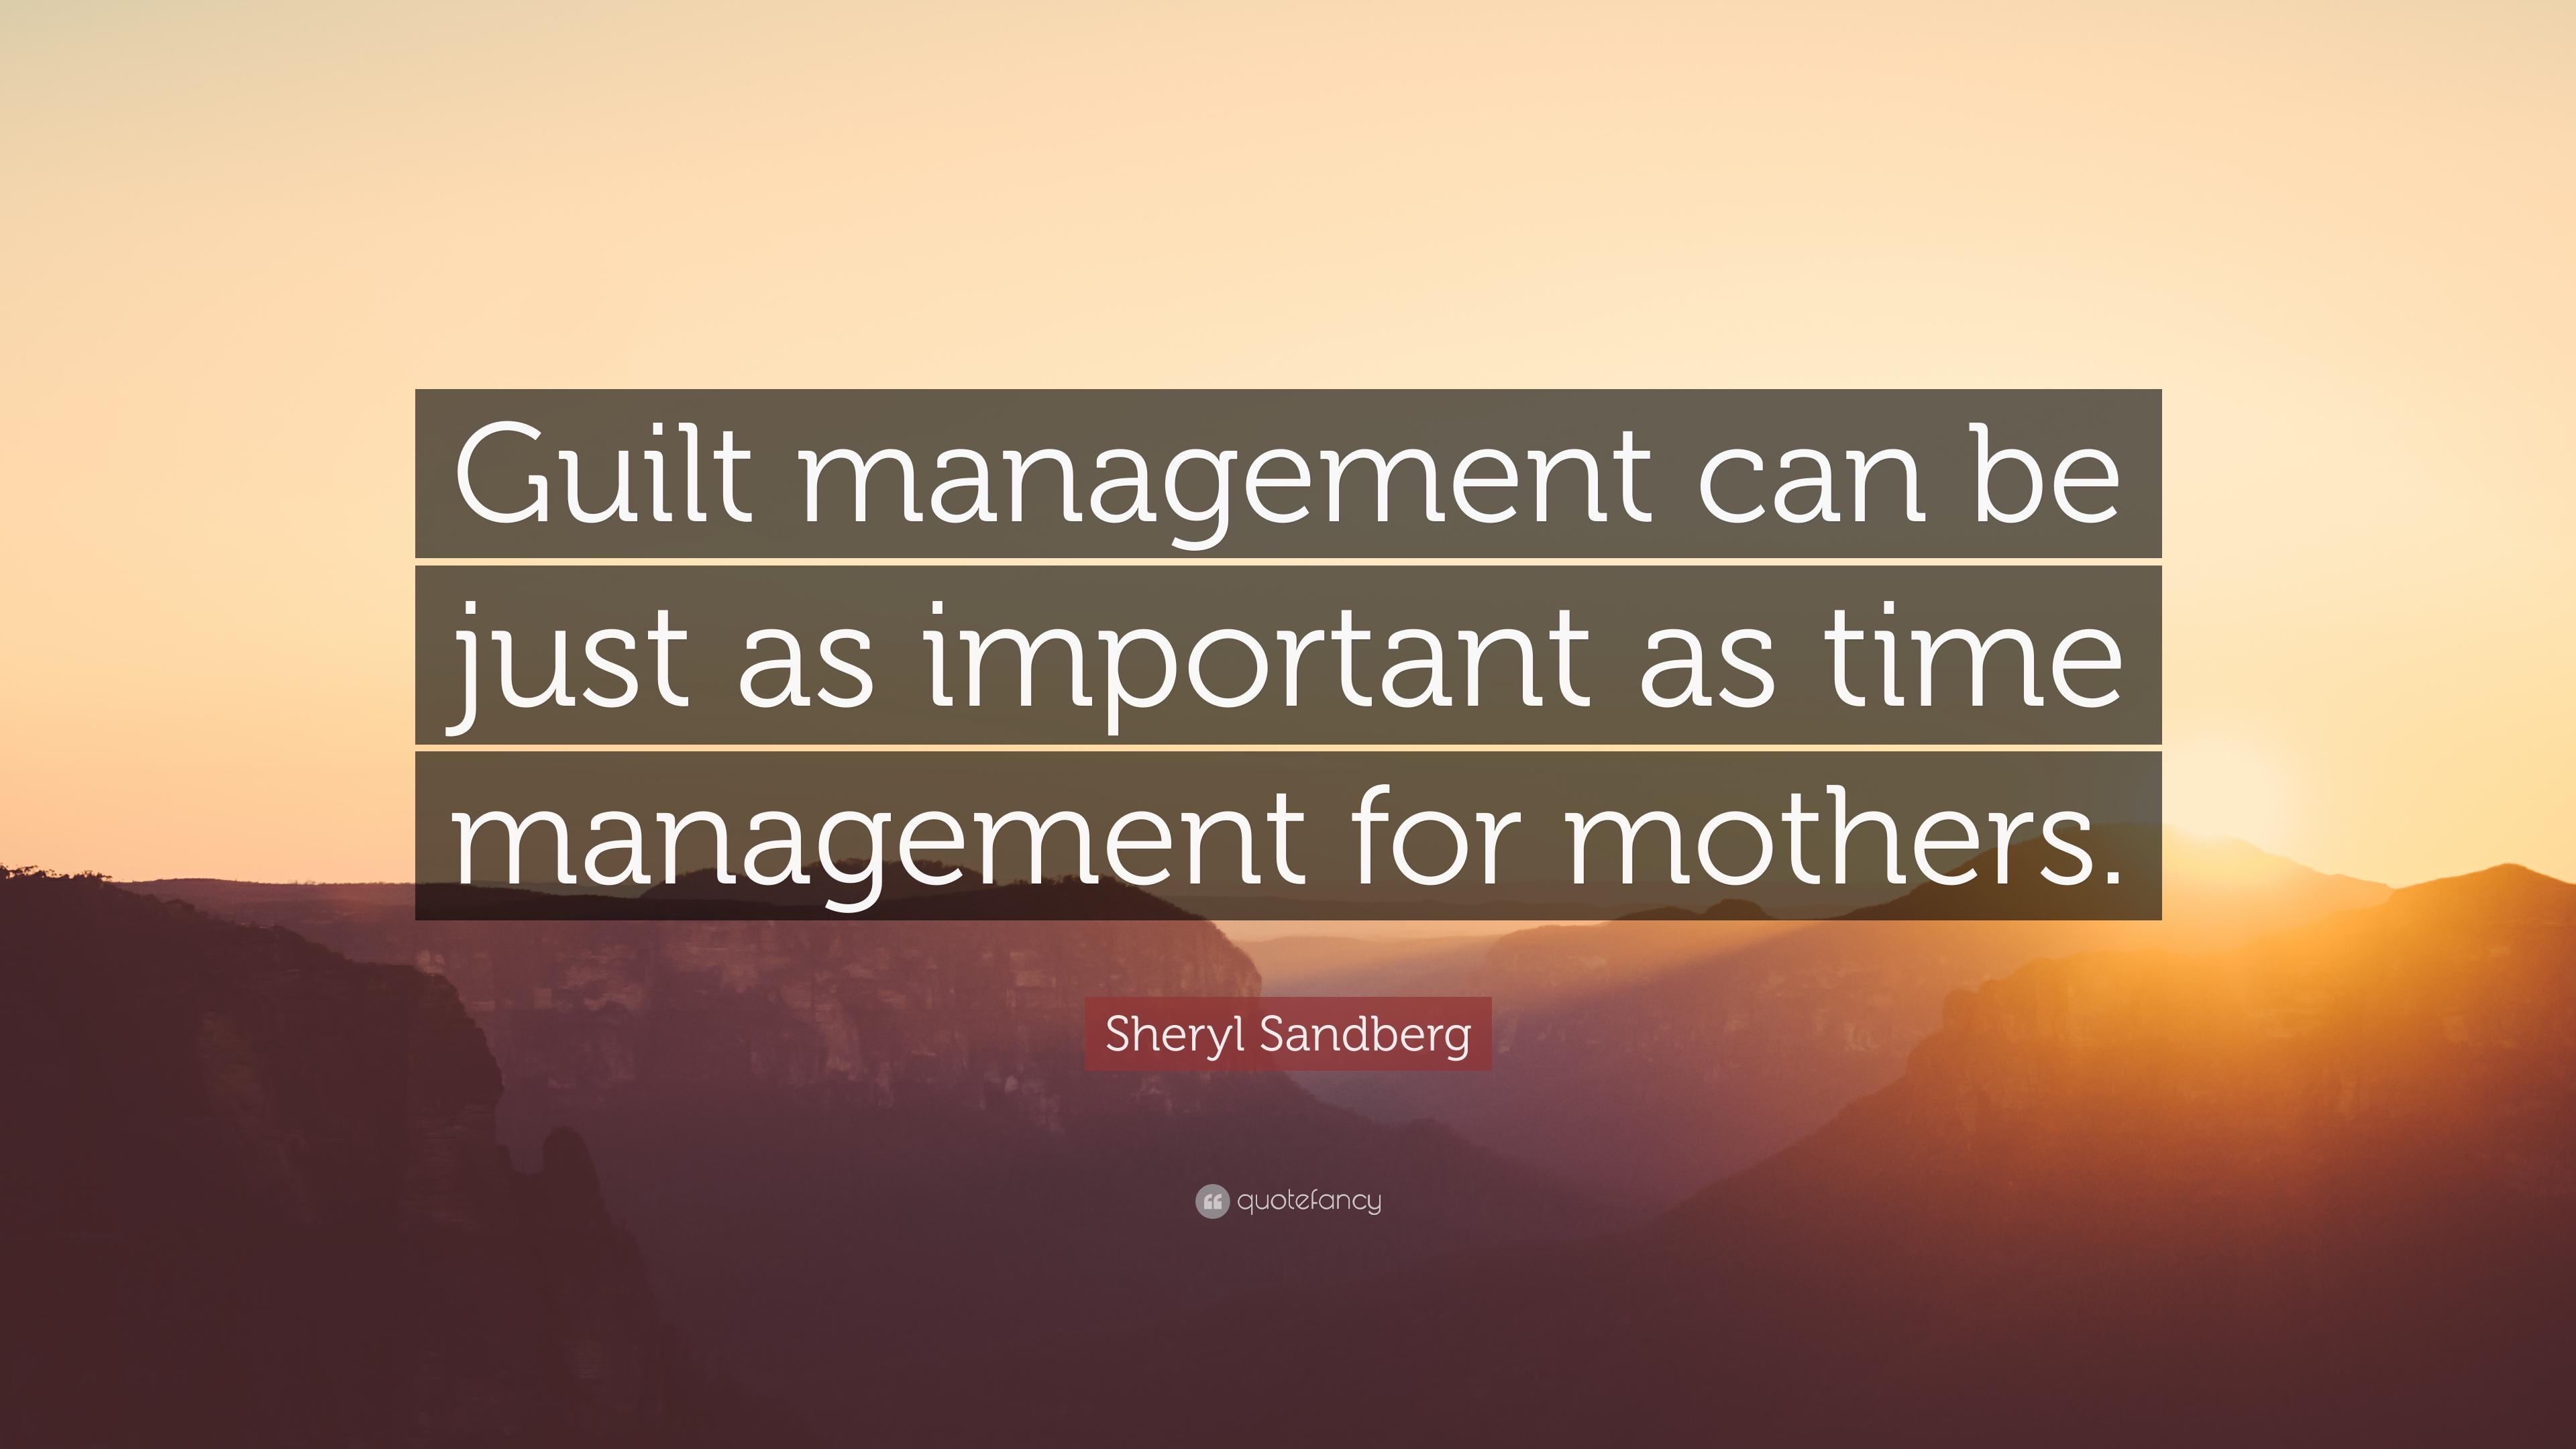 Sheryl Sandberg Quote: “Guilt management can be just as important